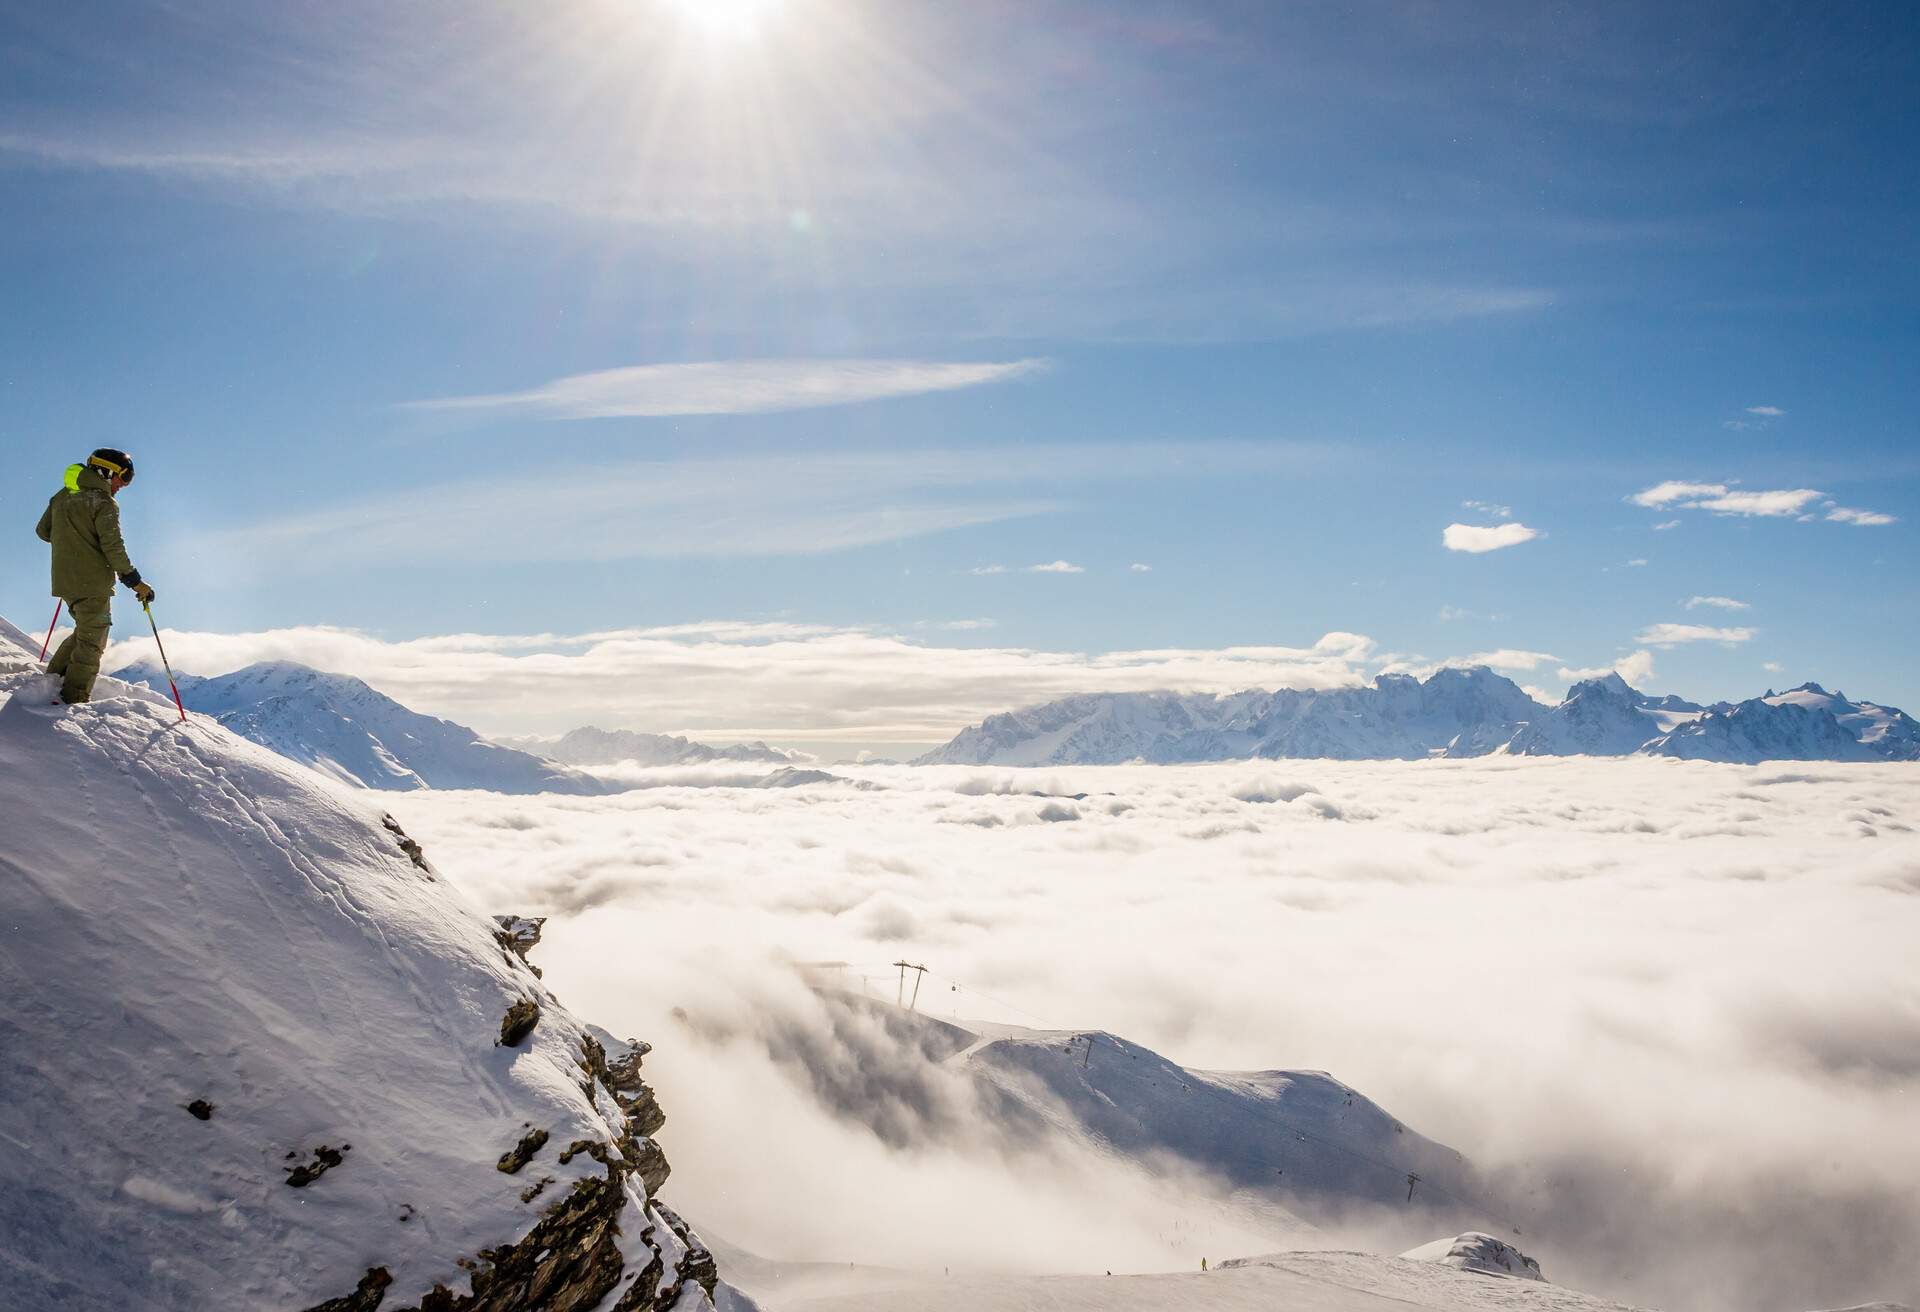 A skier atop a cliff looking down on an overcast layer of clouds across the mountains in the Alps.